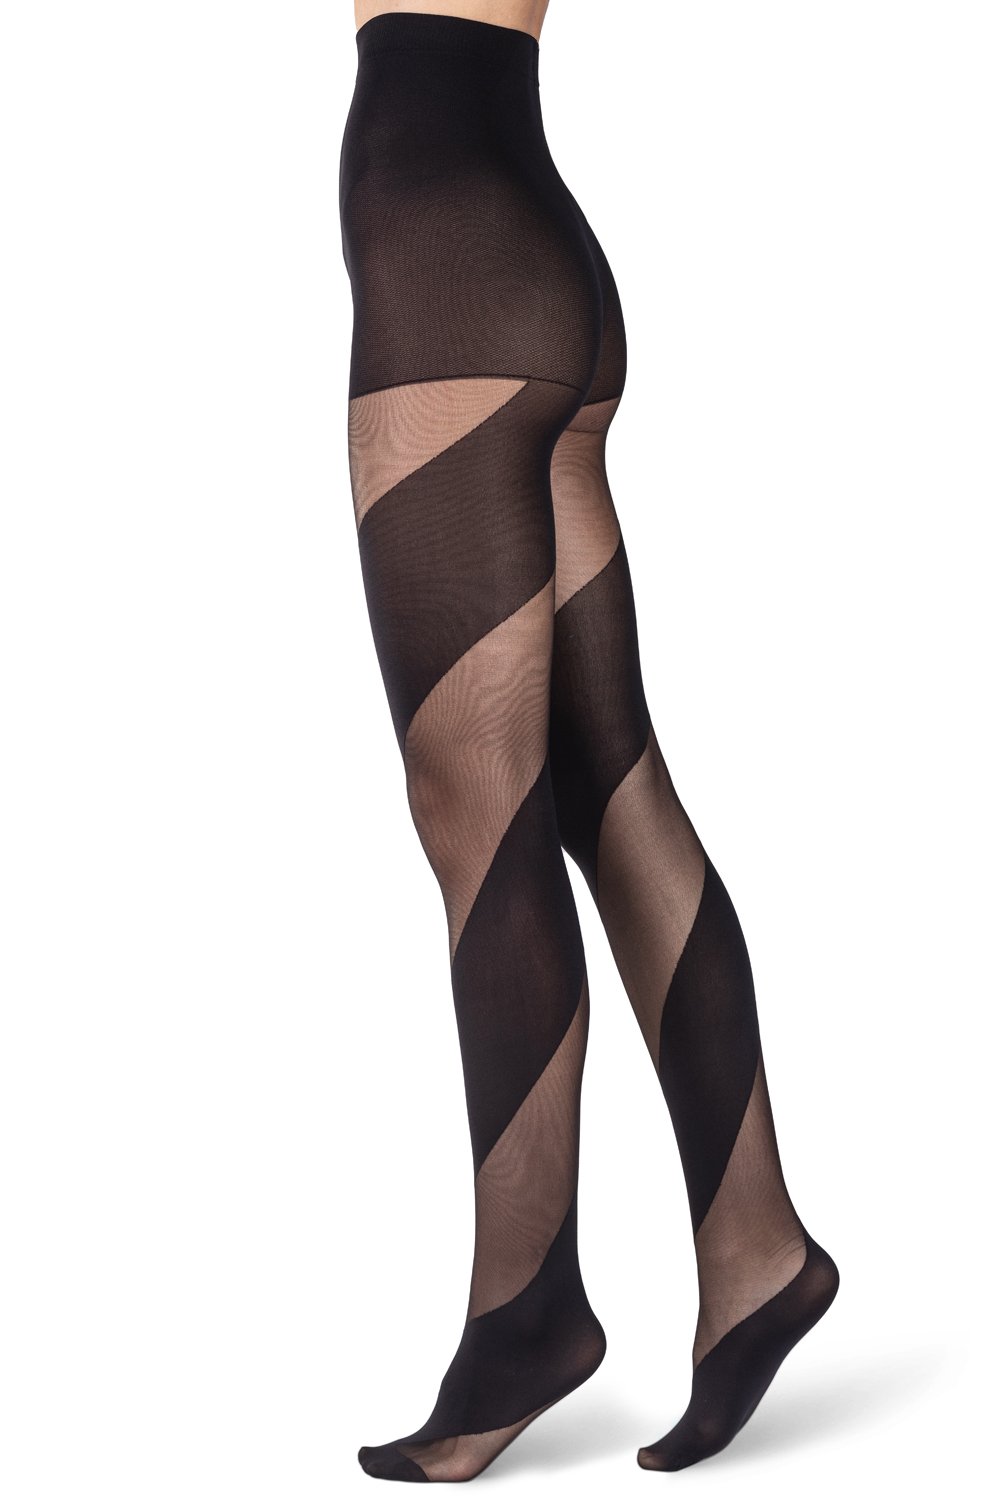 Two Toned Spiral Tights, Timeless Styles, Women